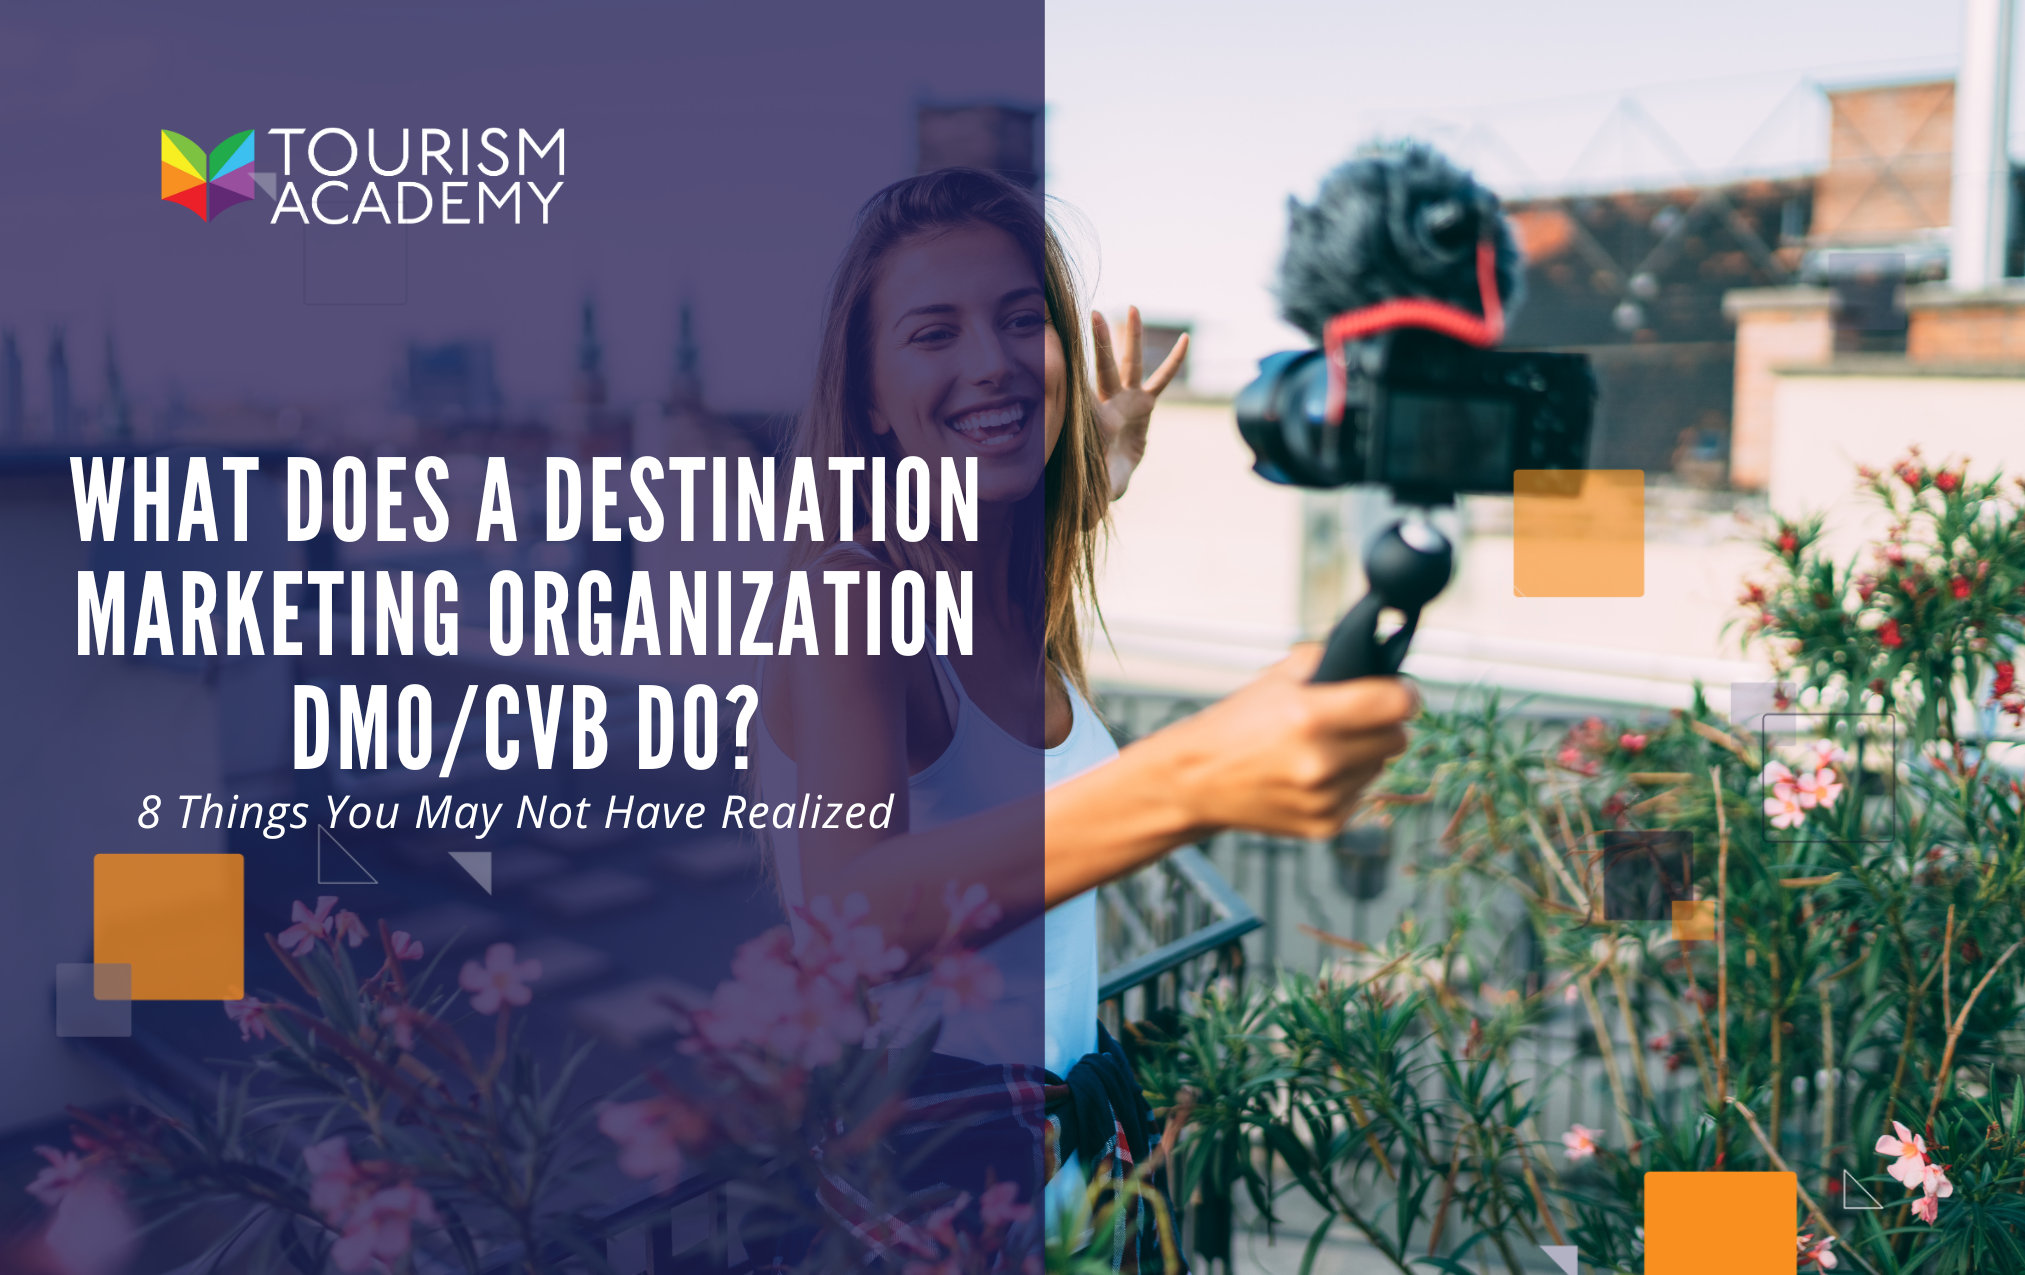 dmo travel industry definition